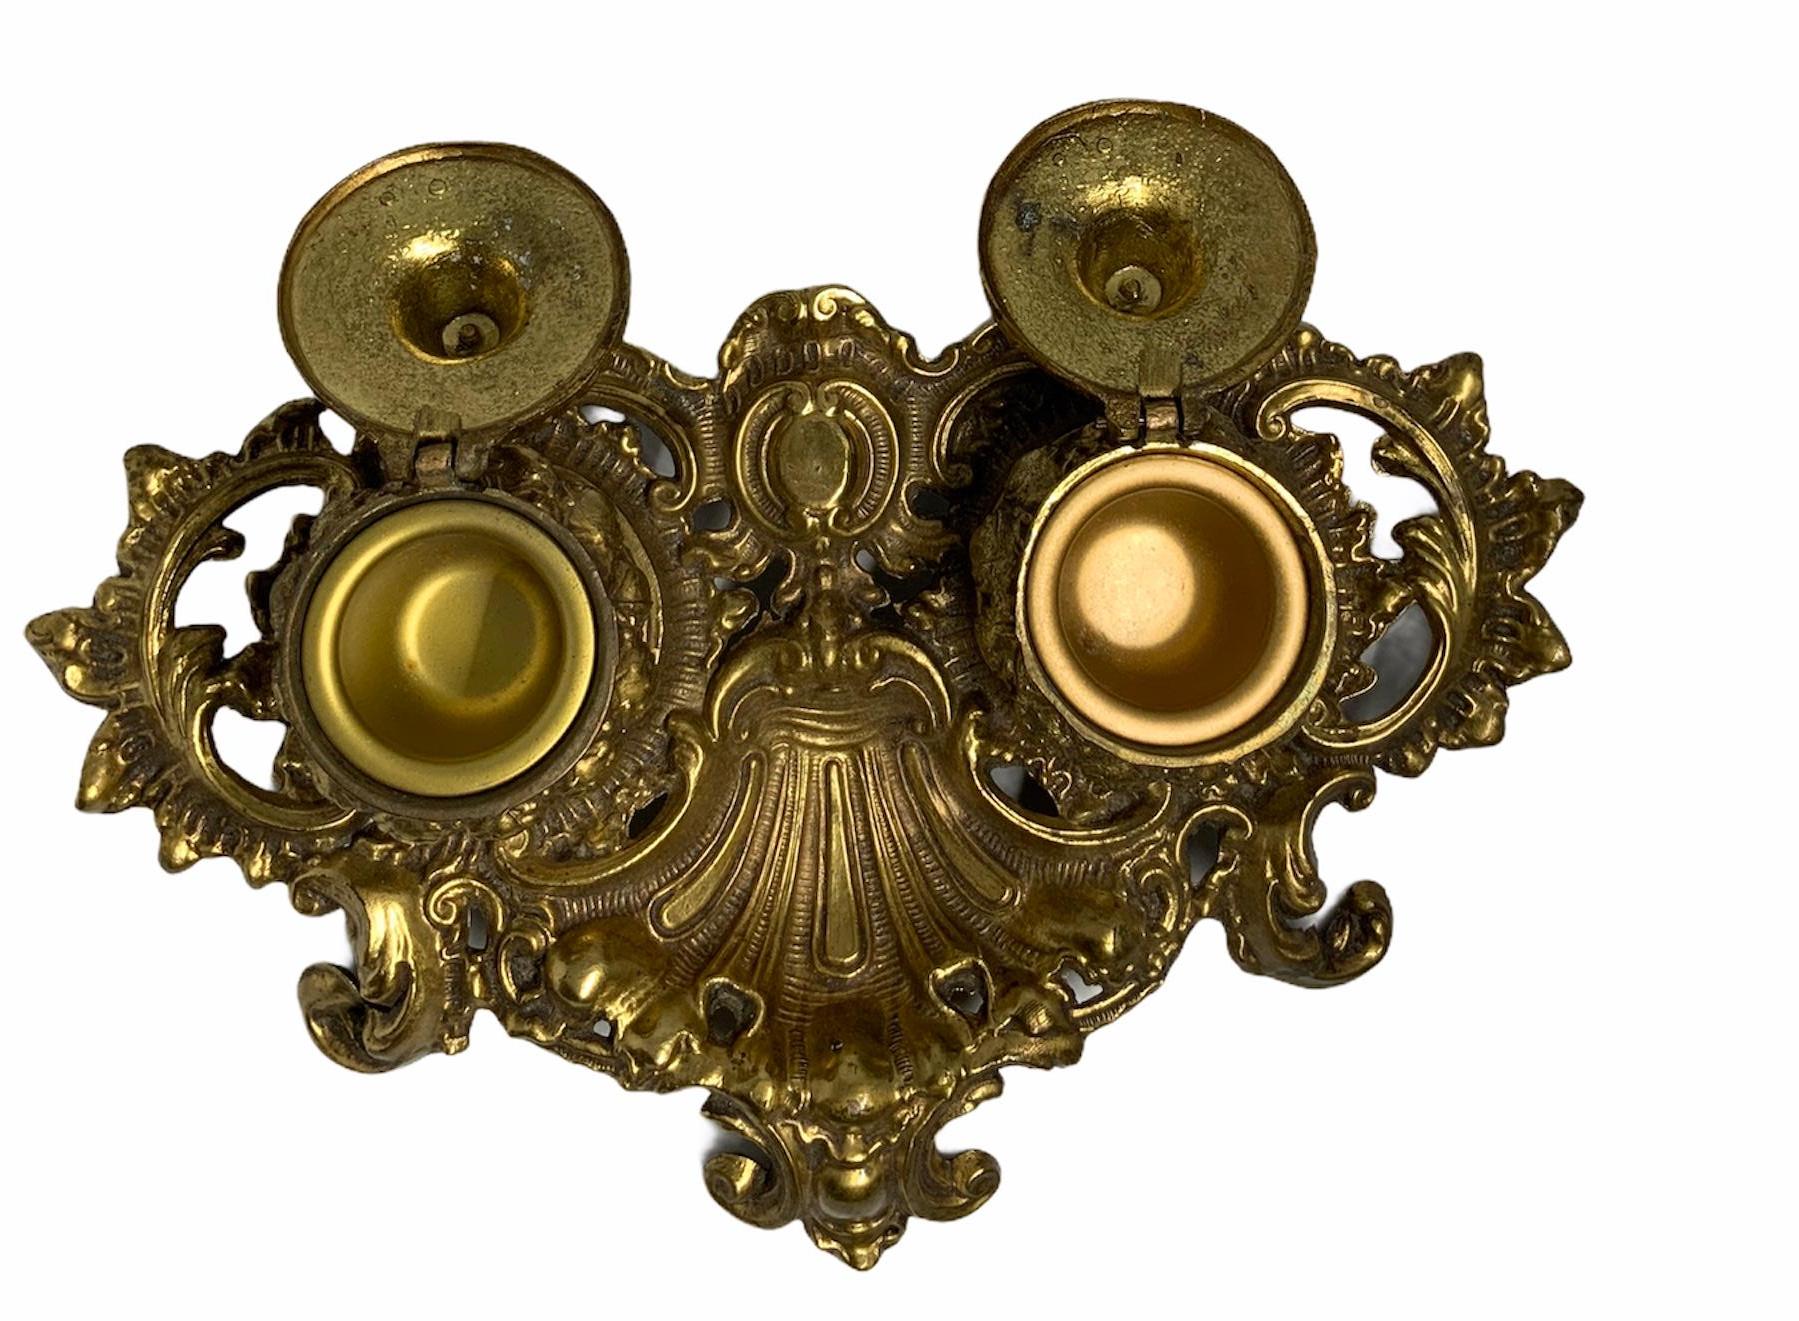 Embossing & chasing techniques are highlighted in the Rococo motifs of this gilt bronze inkwell. The inkwells are shaped as garlic domes. The exaggerated rocaille shaped tray with large scrolls serve as the base for the beautiful well worked hinged